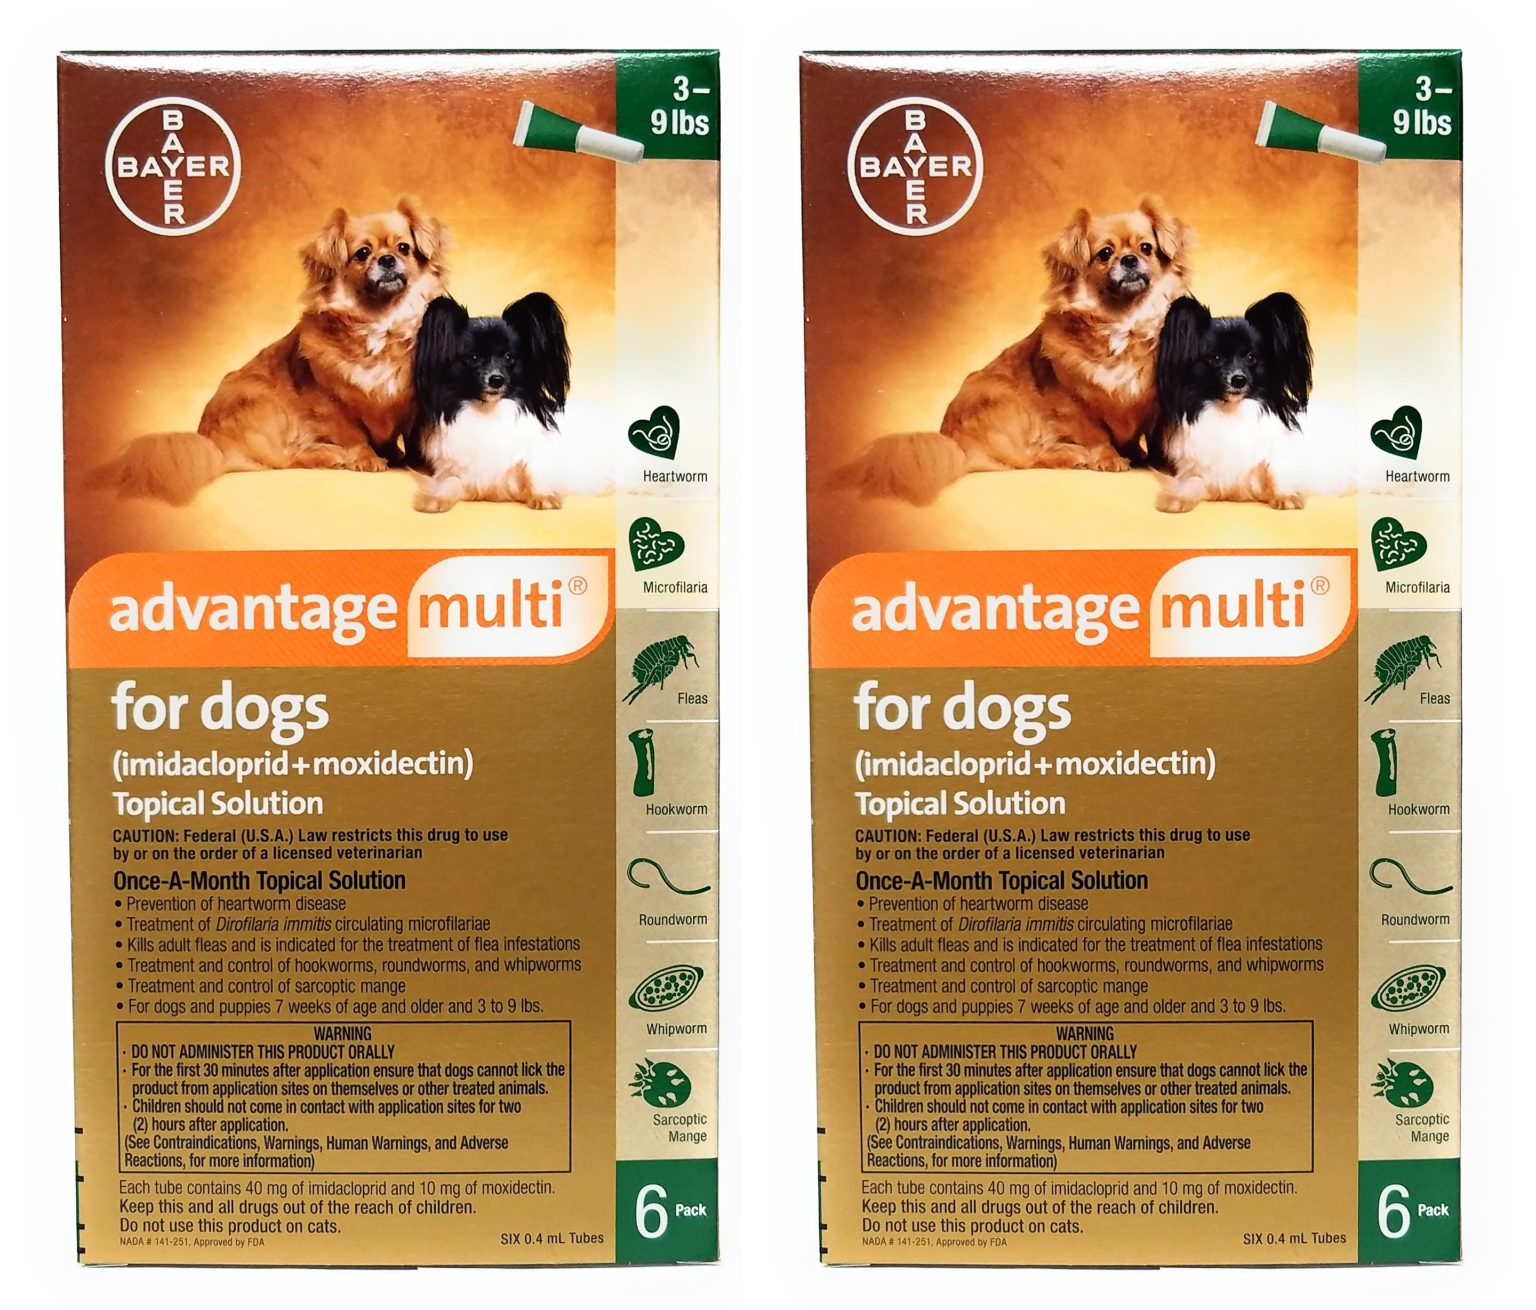 vet-approved-rx-advantage-multi-dog-3-9-lbs-12-doses